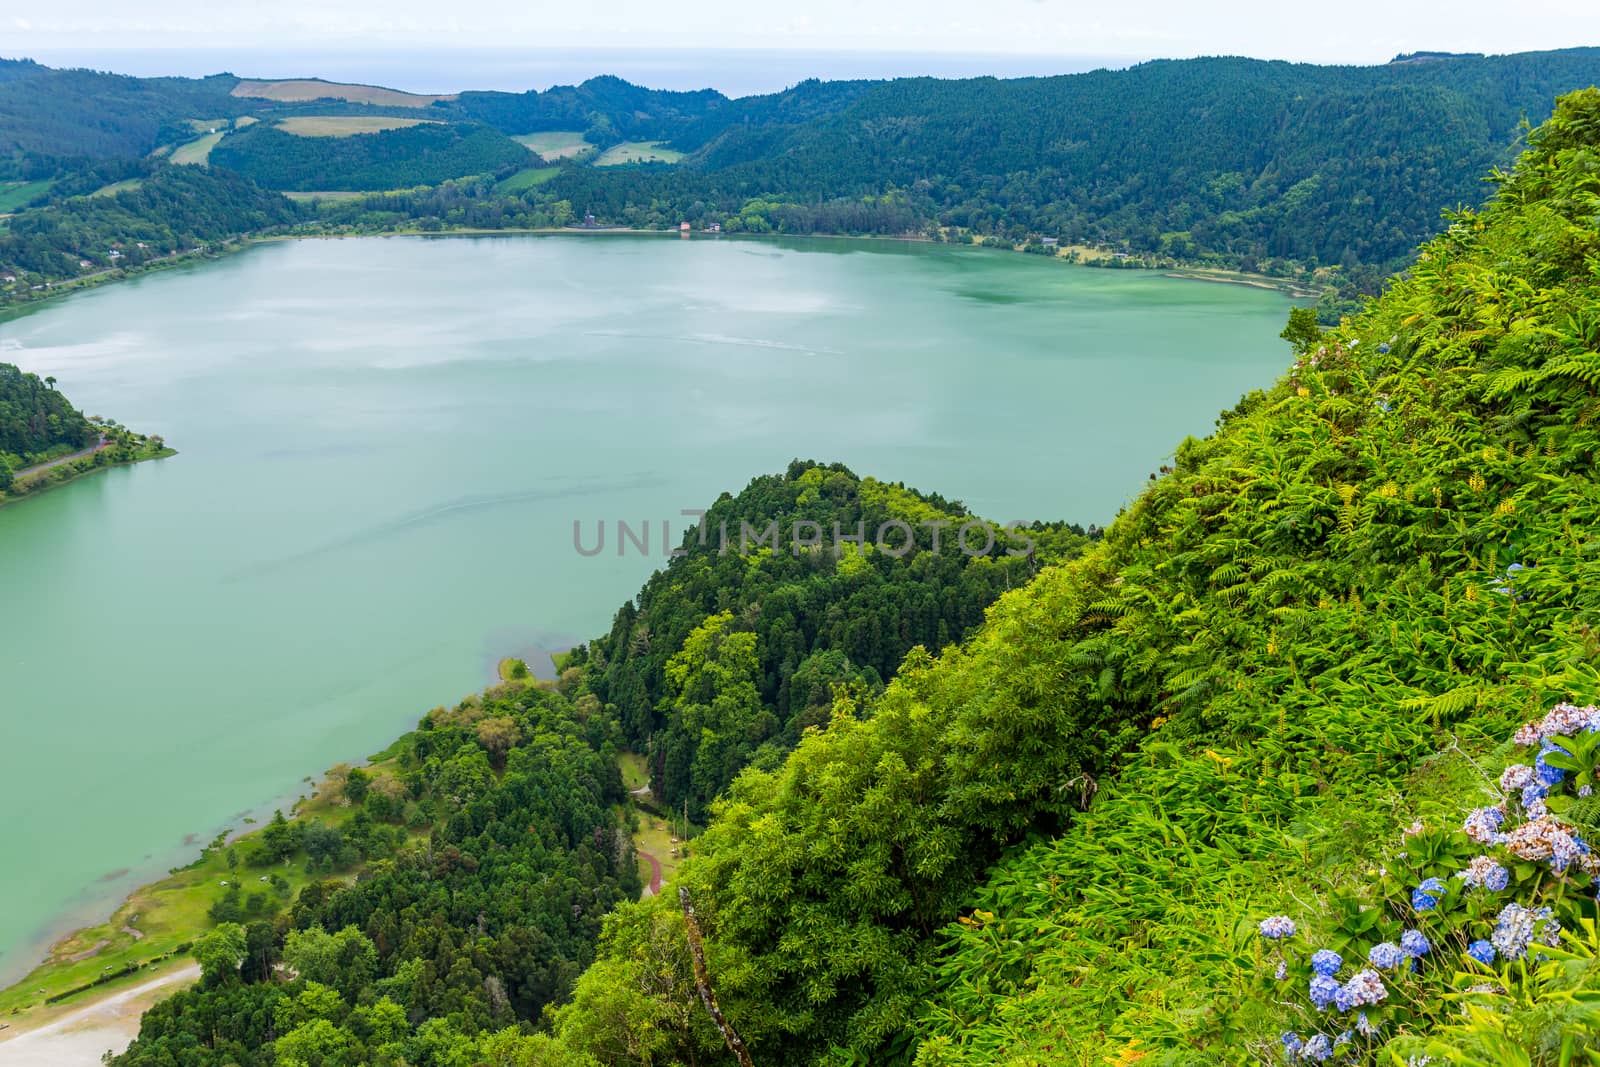 View of the Lake Furnas (Lagoa das Furnas) on Sao Miguel Island, Azores, Portugal from the Pico do Ferro scenic viewpoint. Tranquil scene of the lake in a volcanic crater